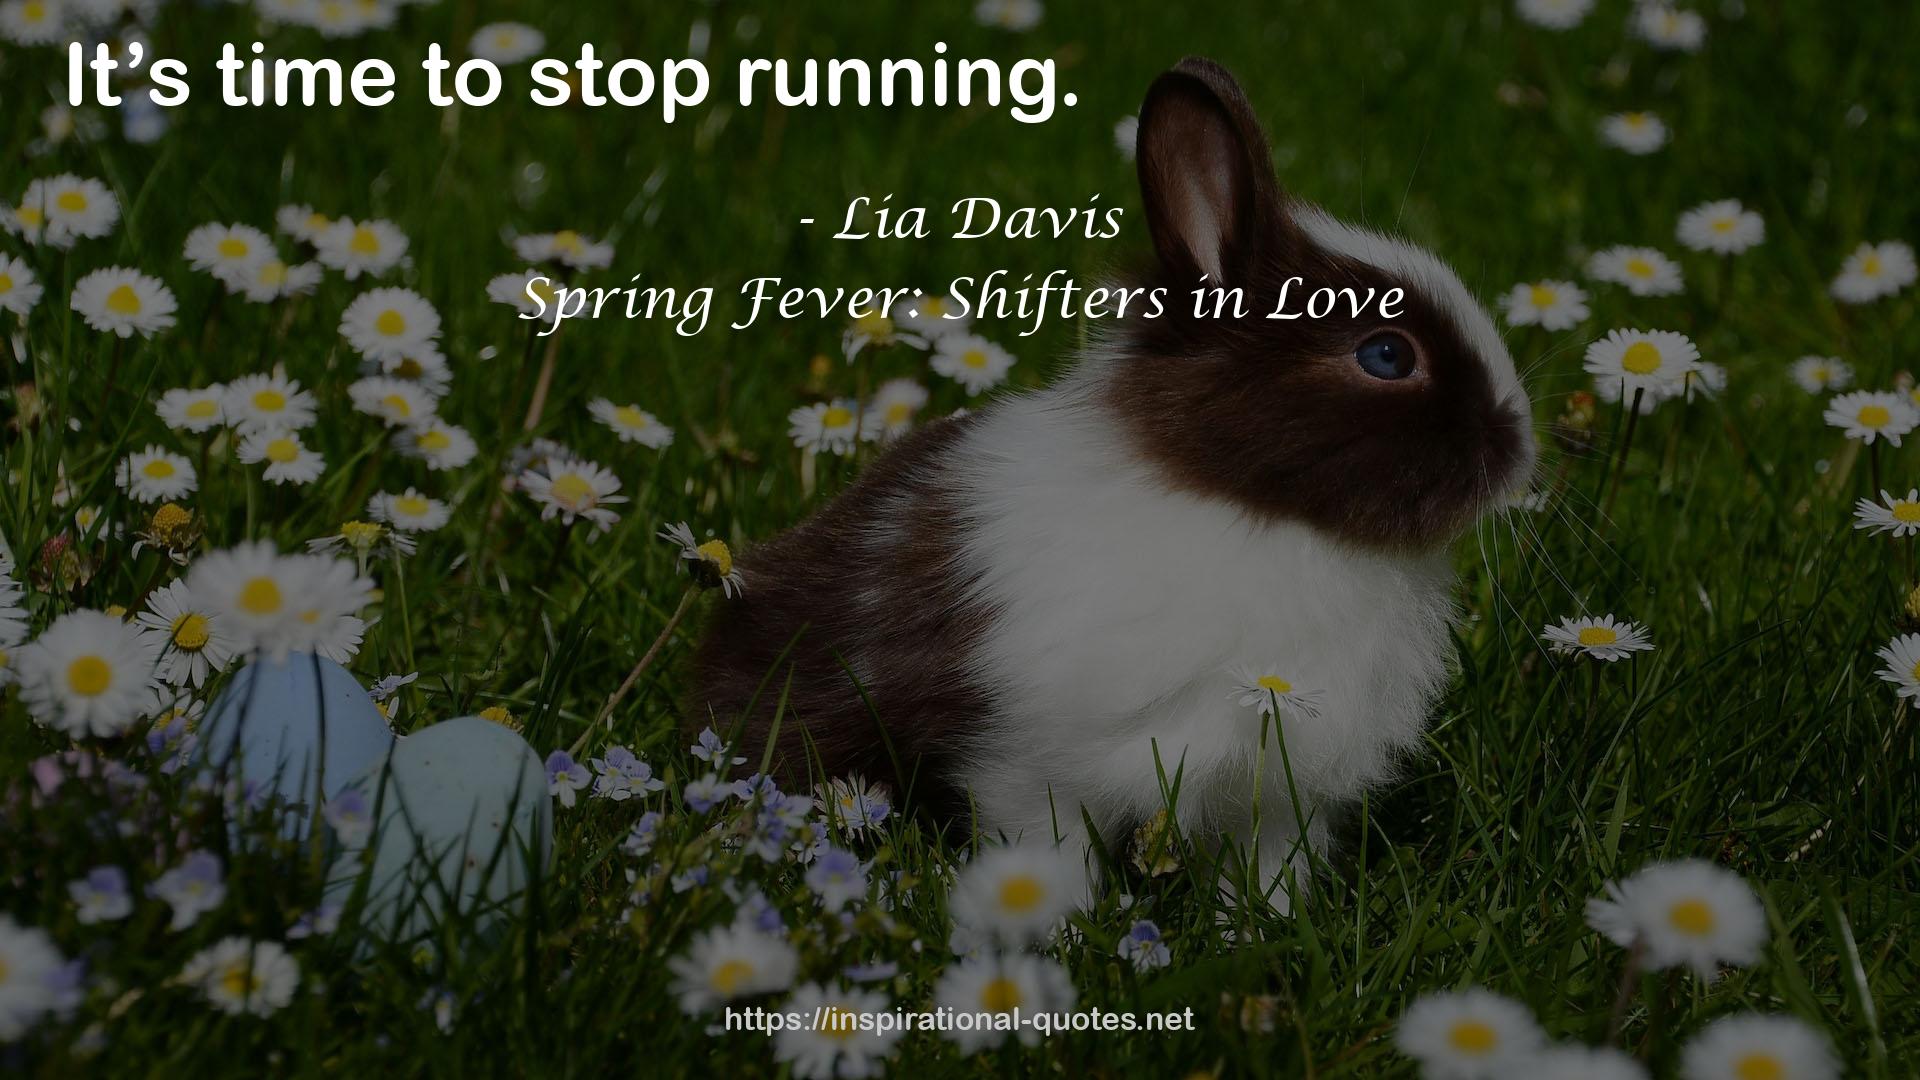 Spring Fever: Shifters in Love QUOTES